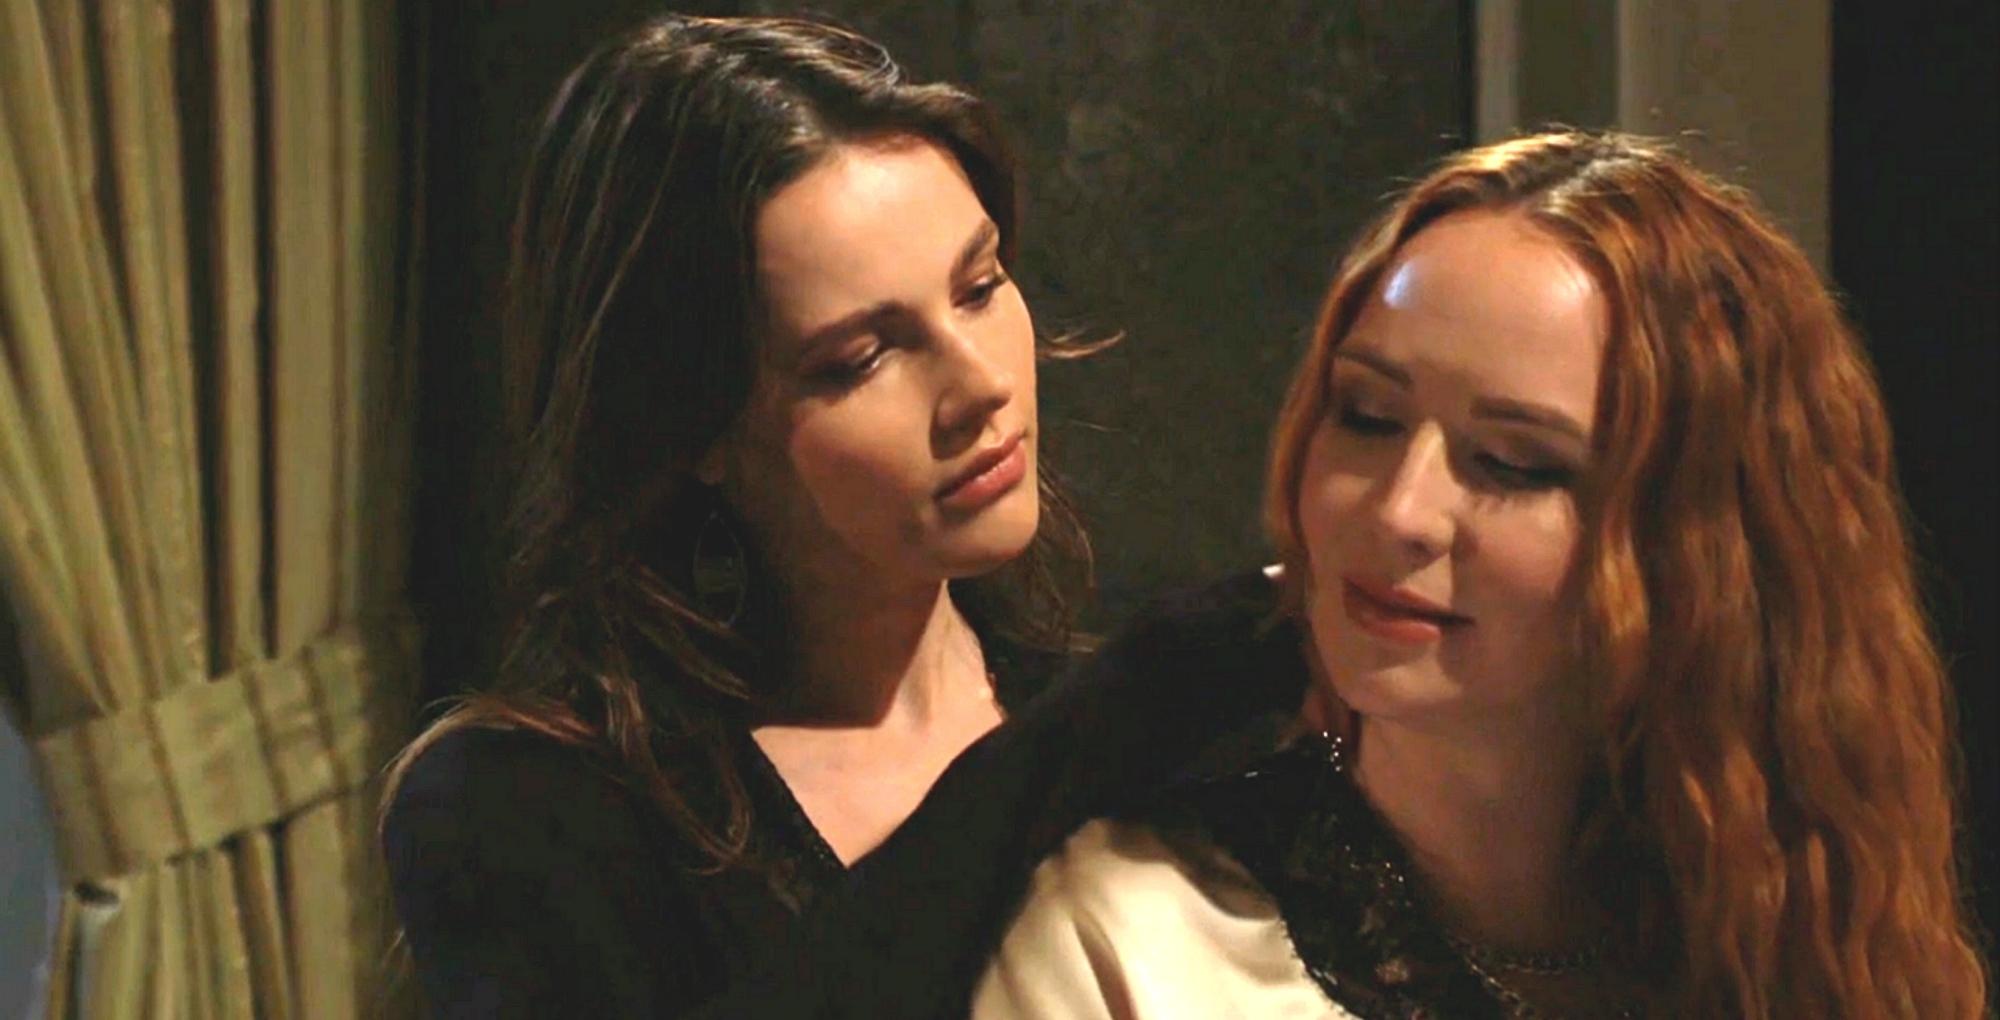 mariah and tessa copeland have romance on the young and the restless recap for may 19, 2023.